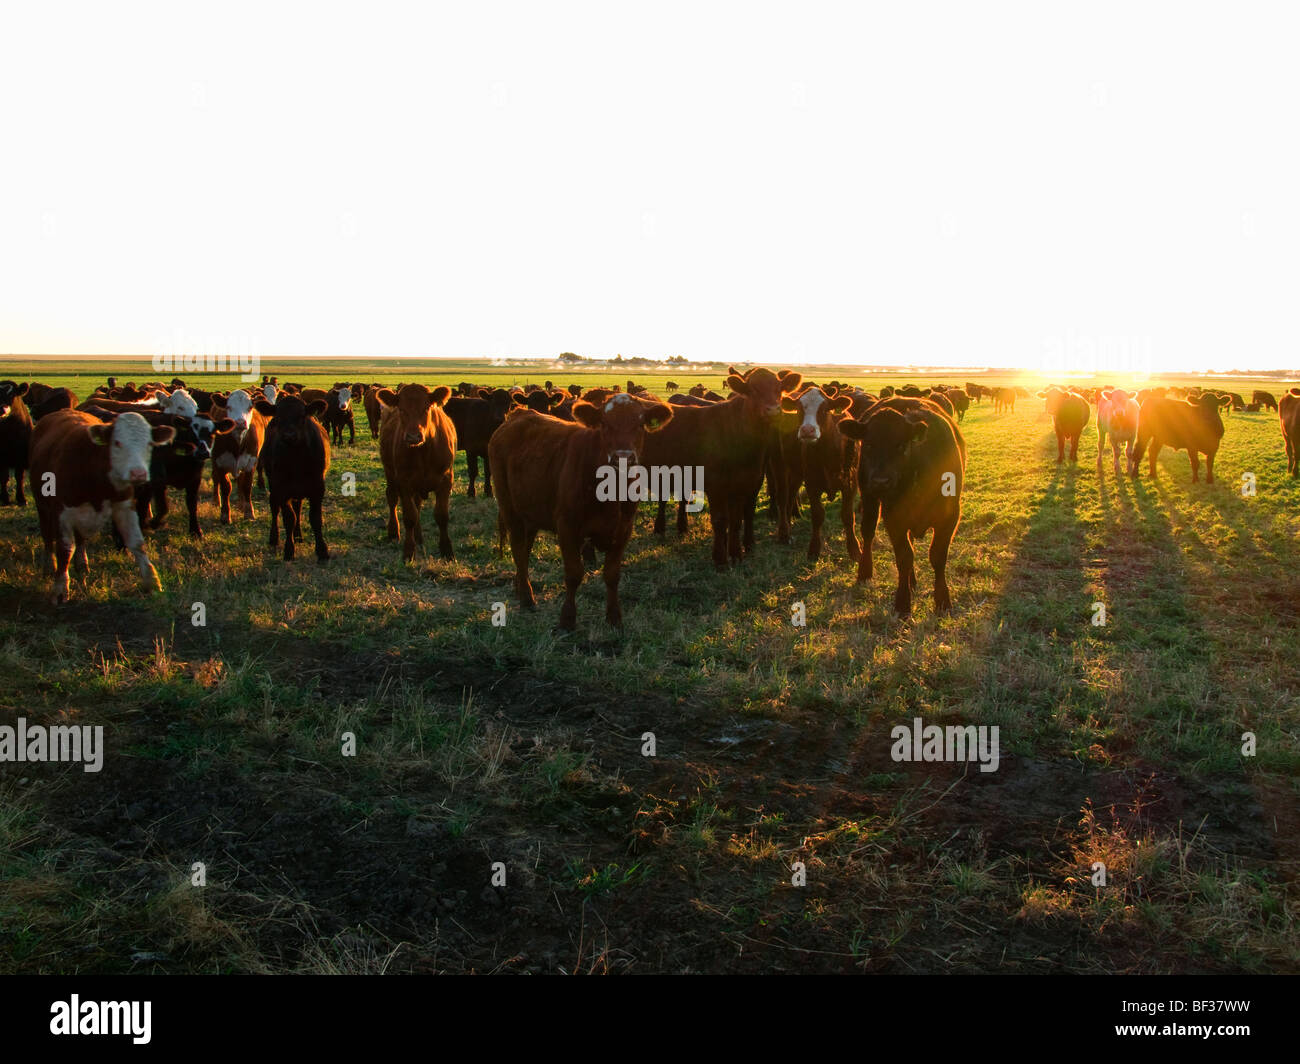 Livestock - Herd of beef steers on a green pasture backlit by the sunrise / Alberta, Canada. Stock Photo